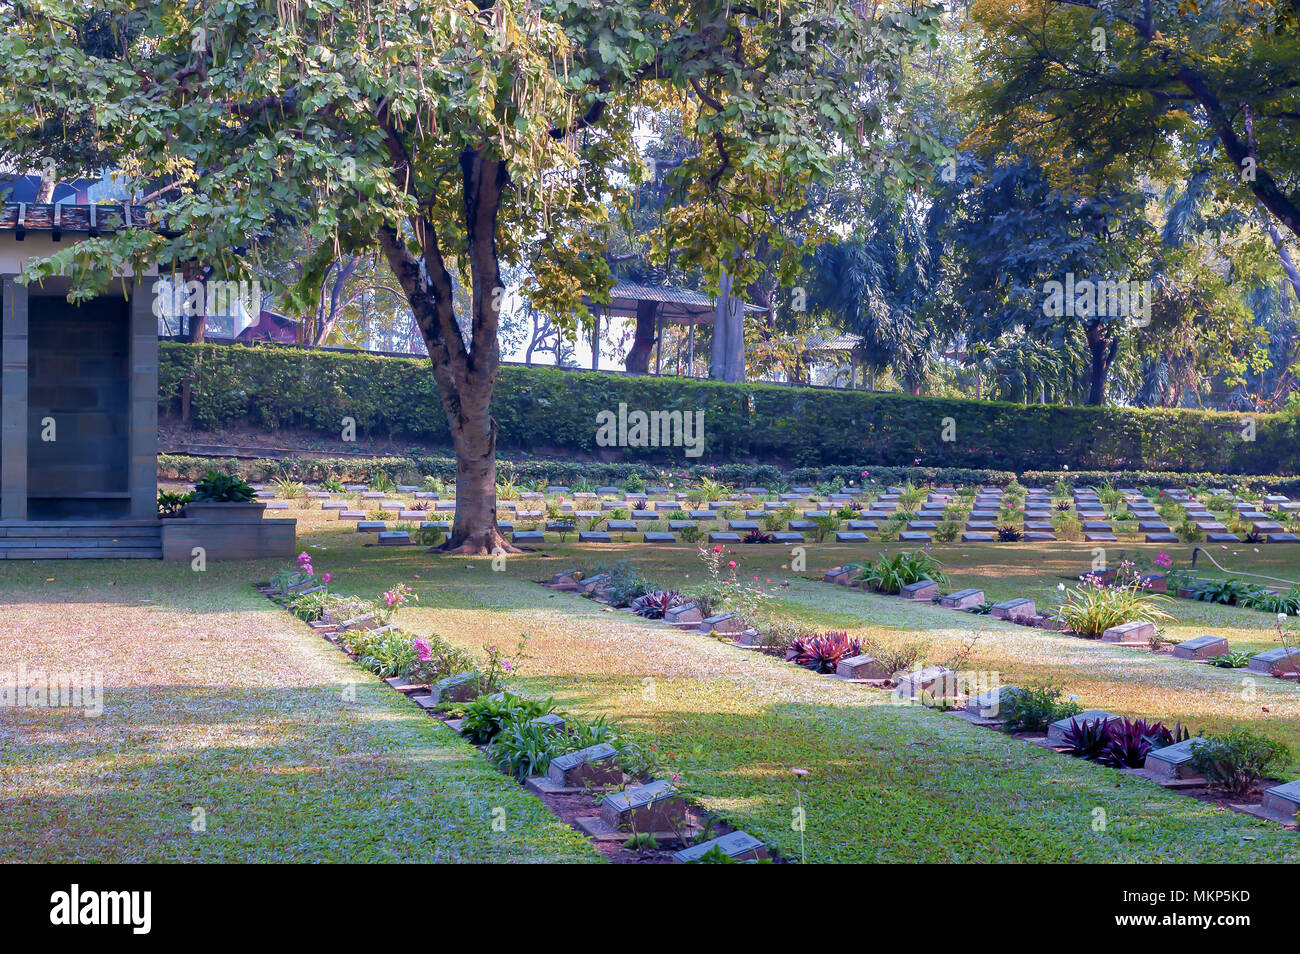 A WWII cemetery at Silpukhuri, Navagraha Road, Guwahati, India. The war cemetery was set up during WWII for burial of servicemen killed in the war. Stock Photo